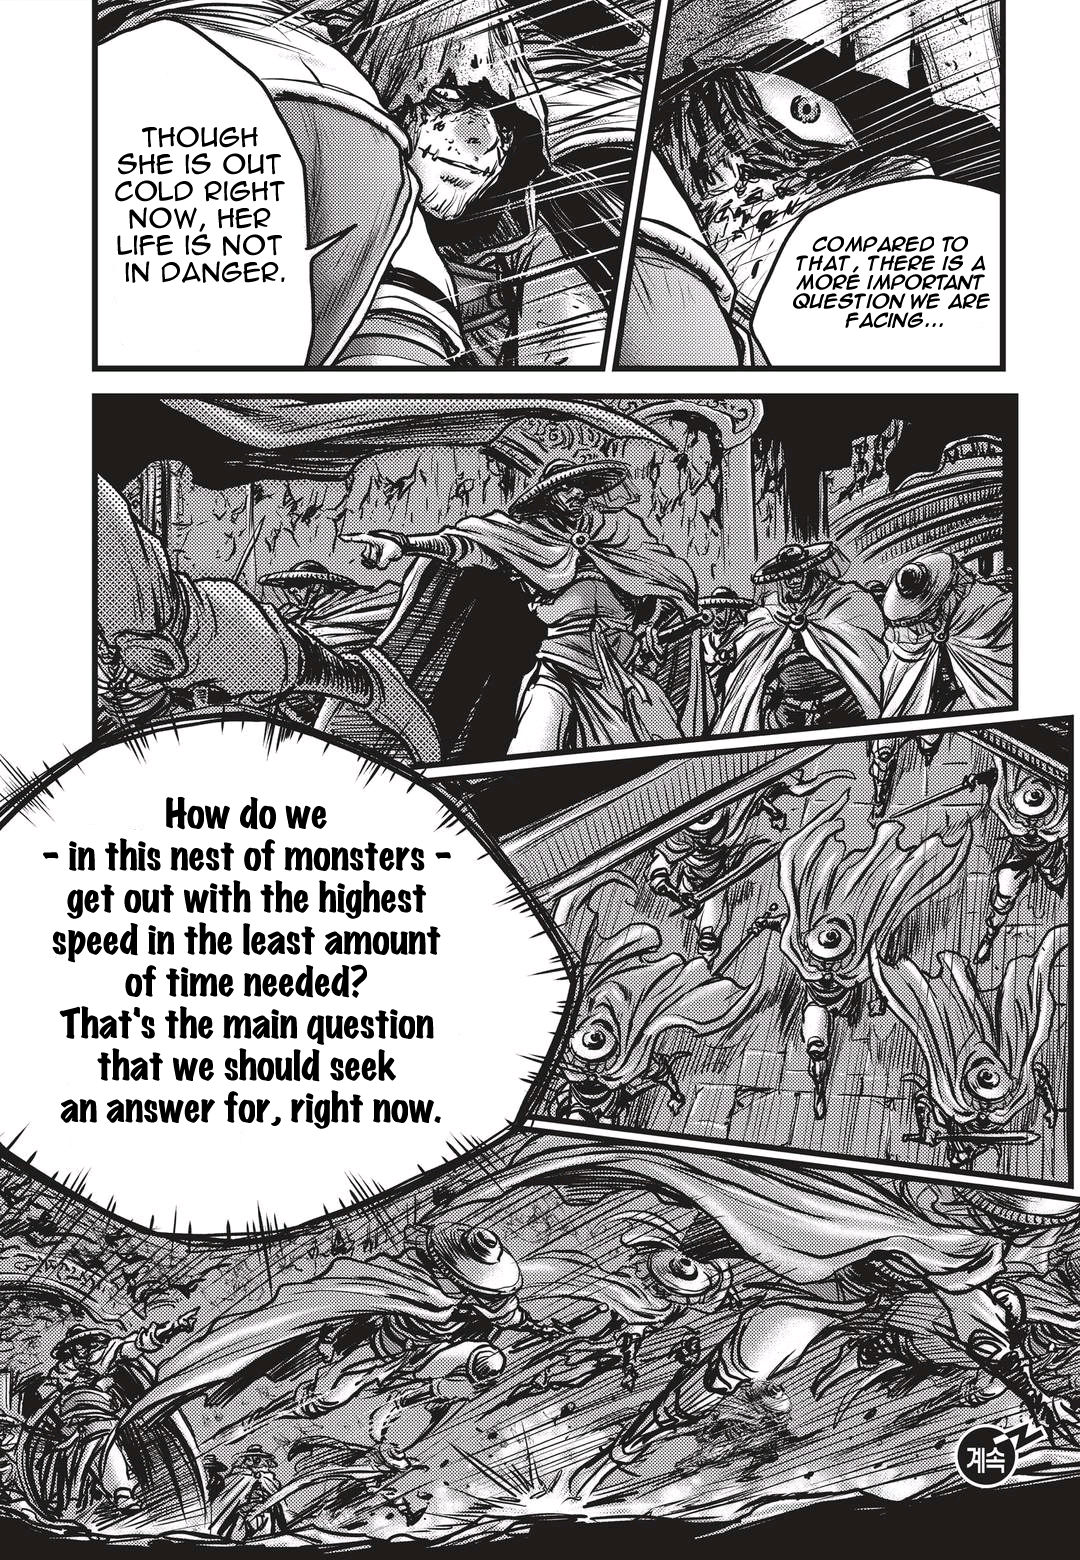 Ruler of the Land Vol.68 Ch.487